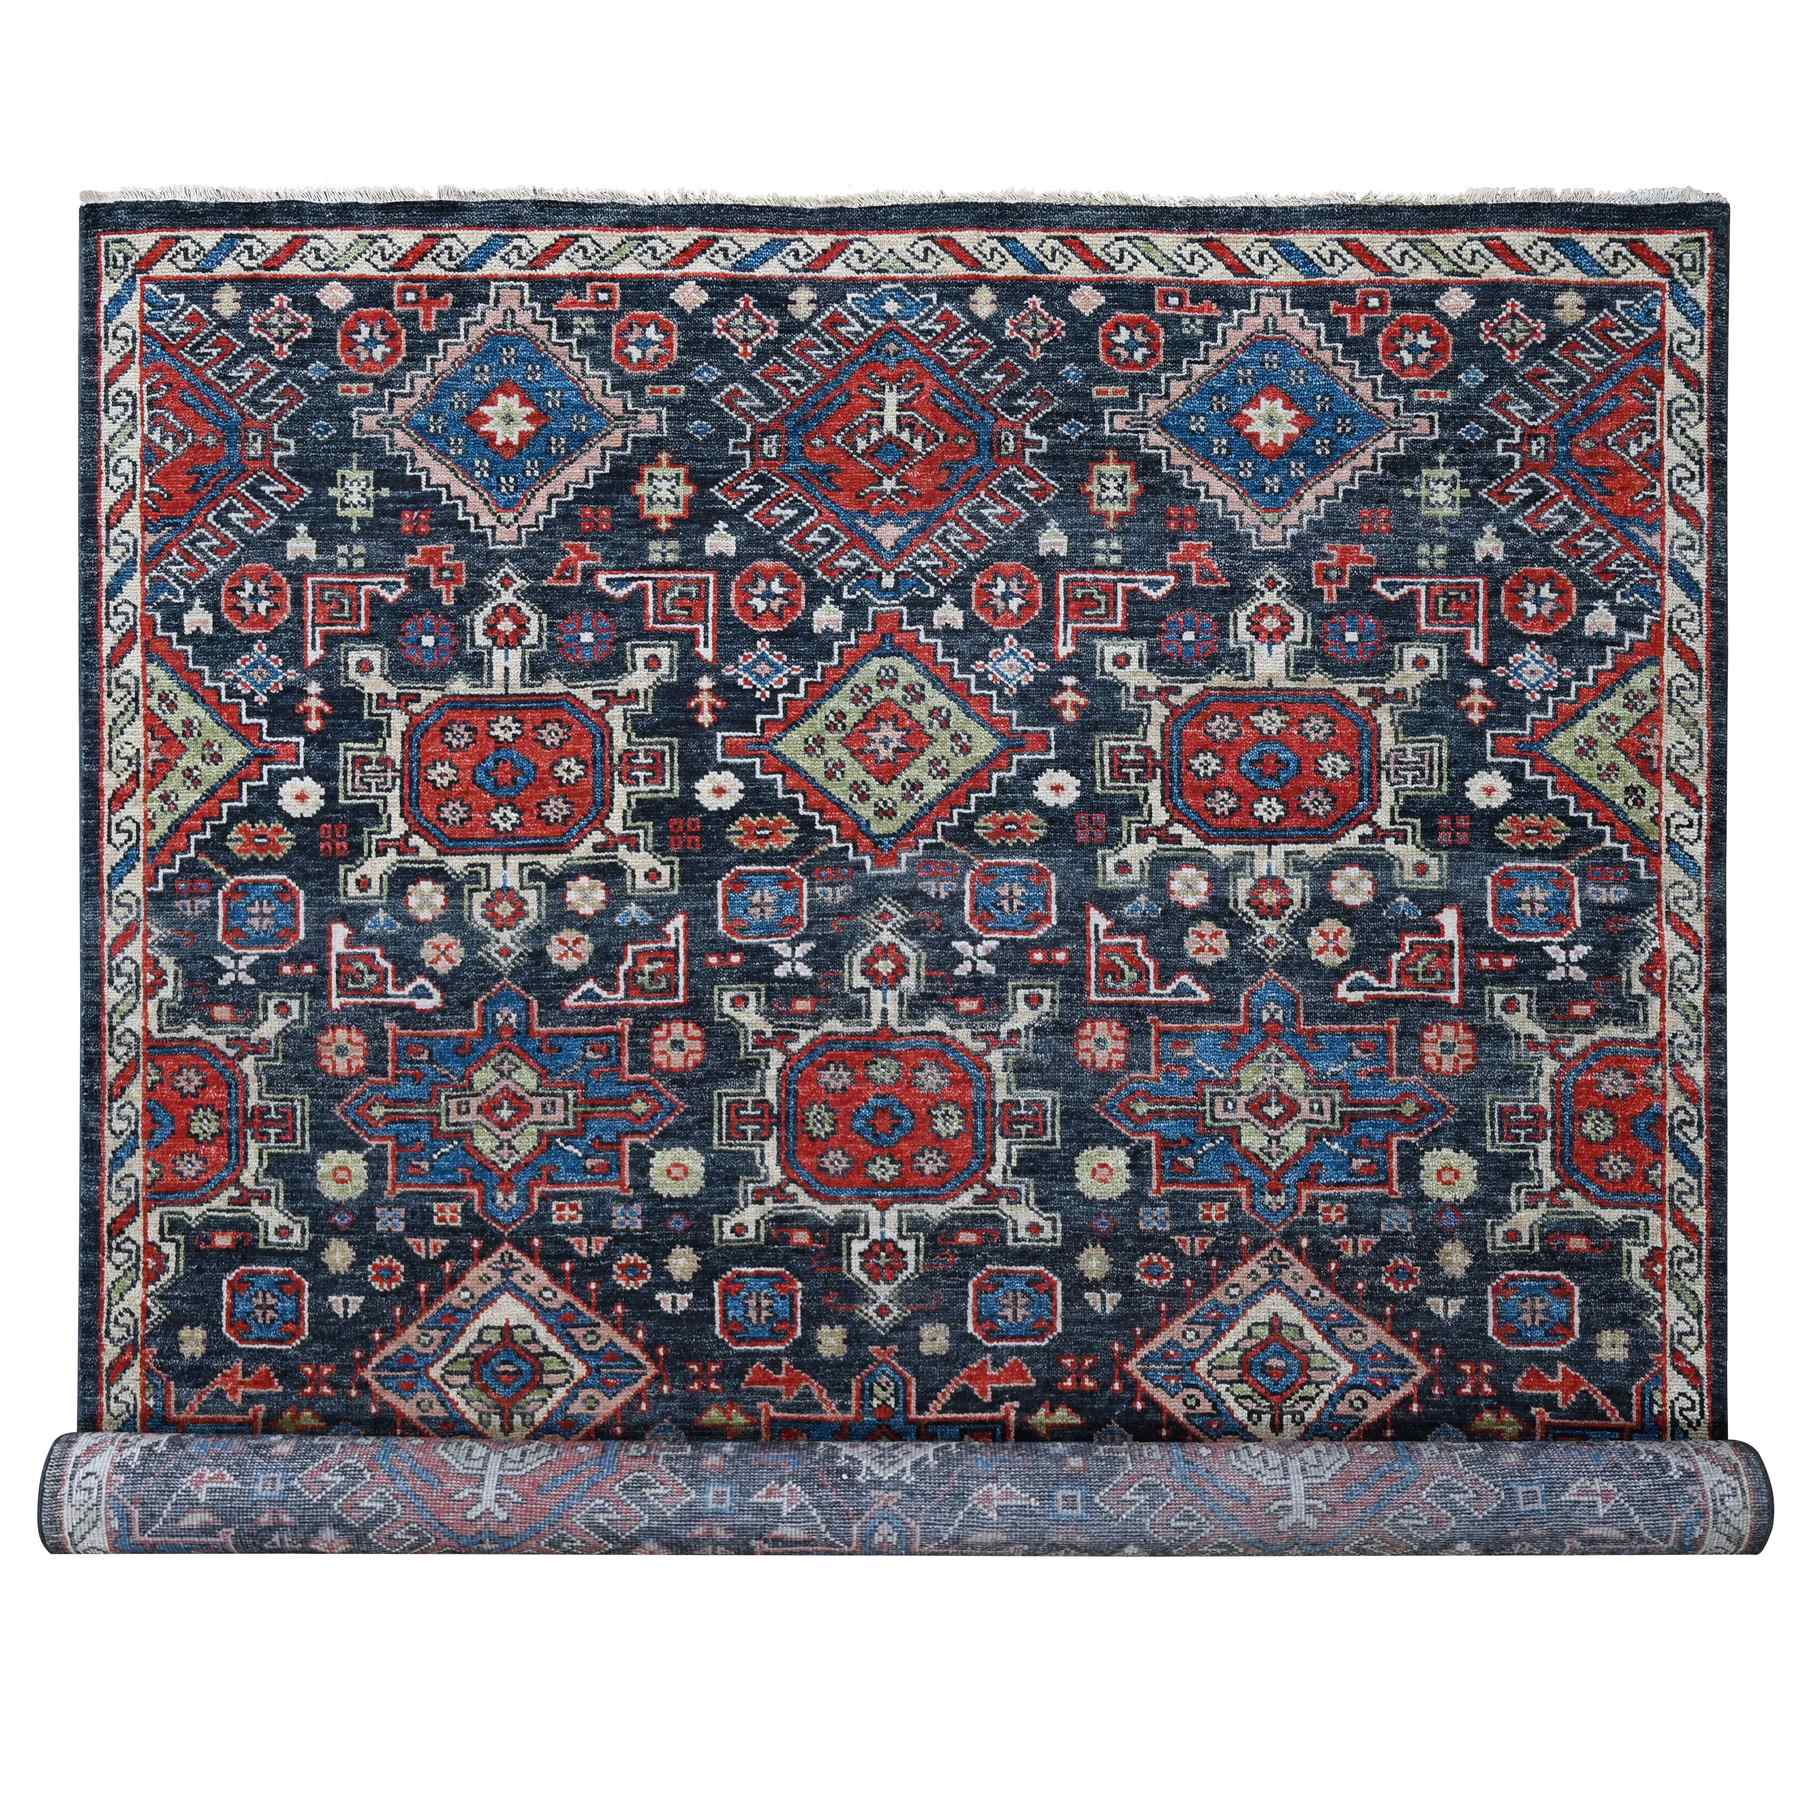  Wool Hand-Knotted Area Rug 10'2